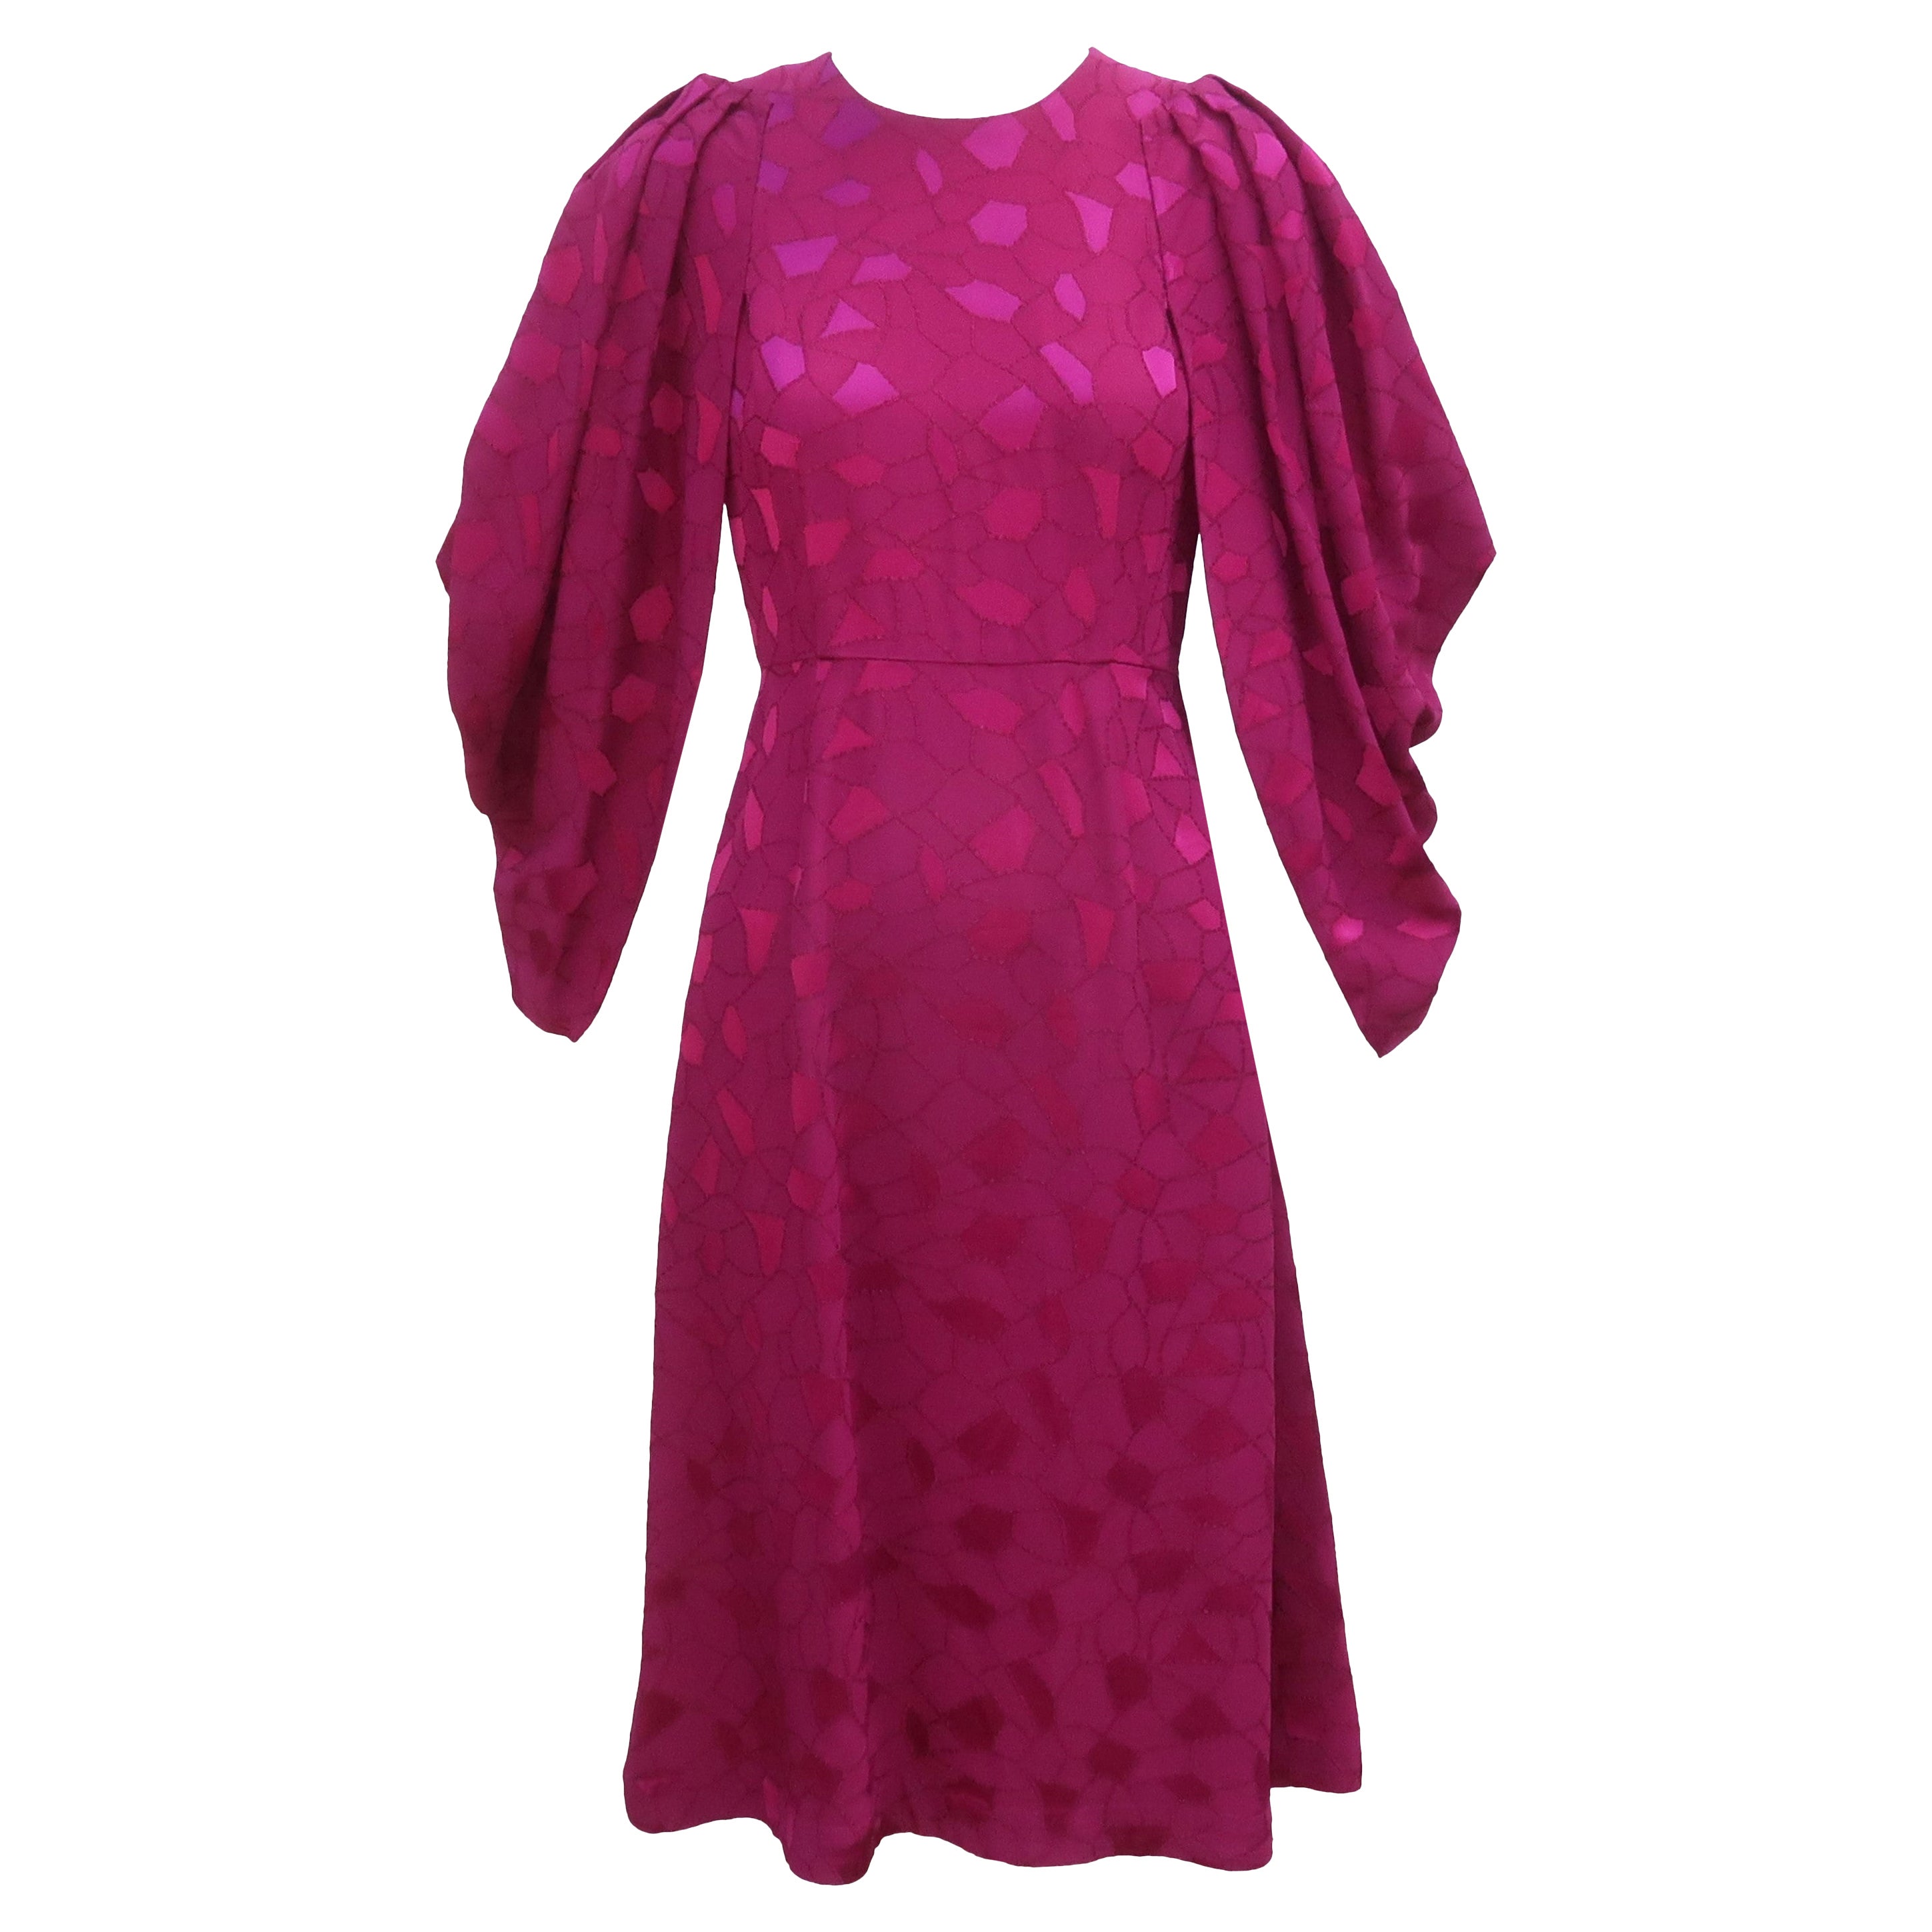 CO Cocoon Sleeve Magenta Dress, 2018 For Sale